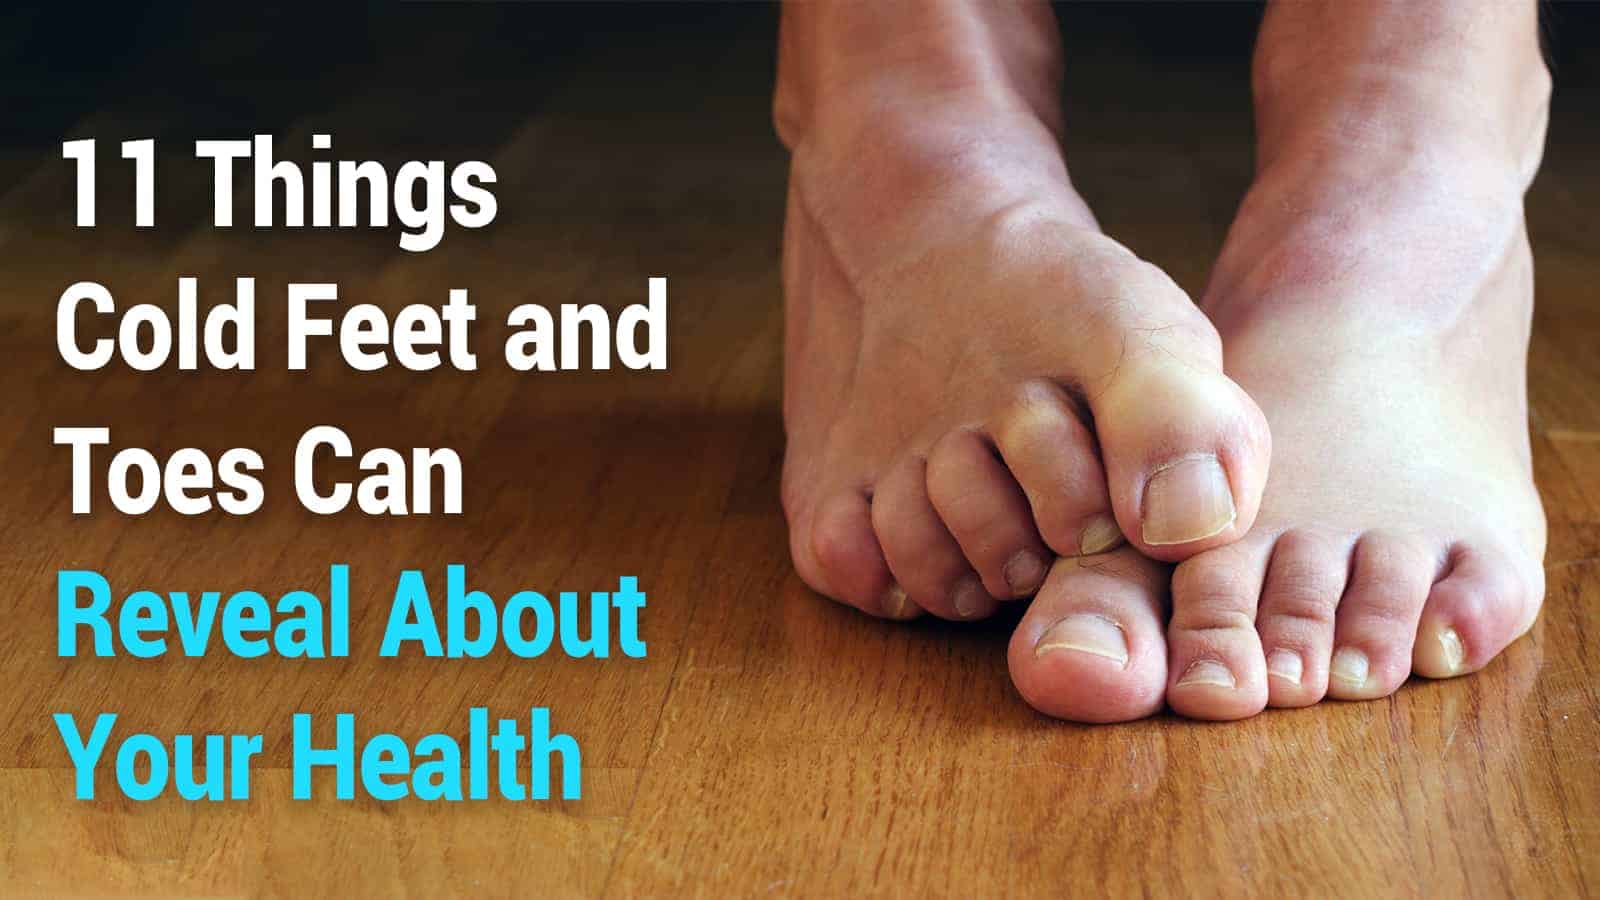 11 Things Cold Feet and Toes Can Reveal About Your Health